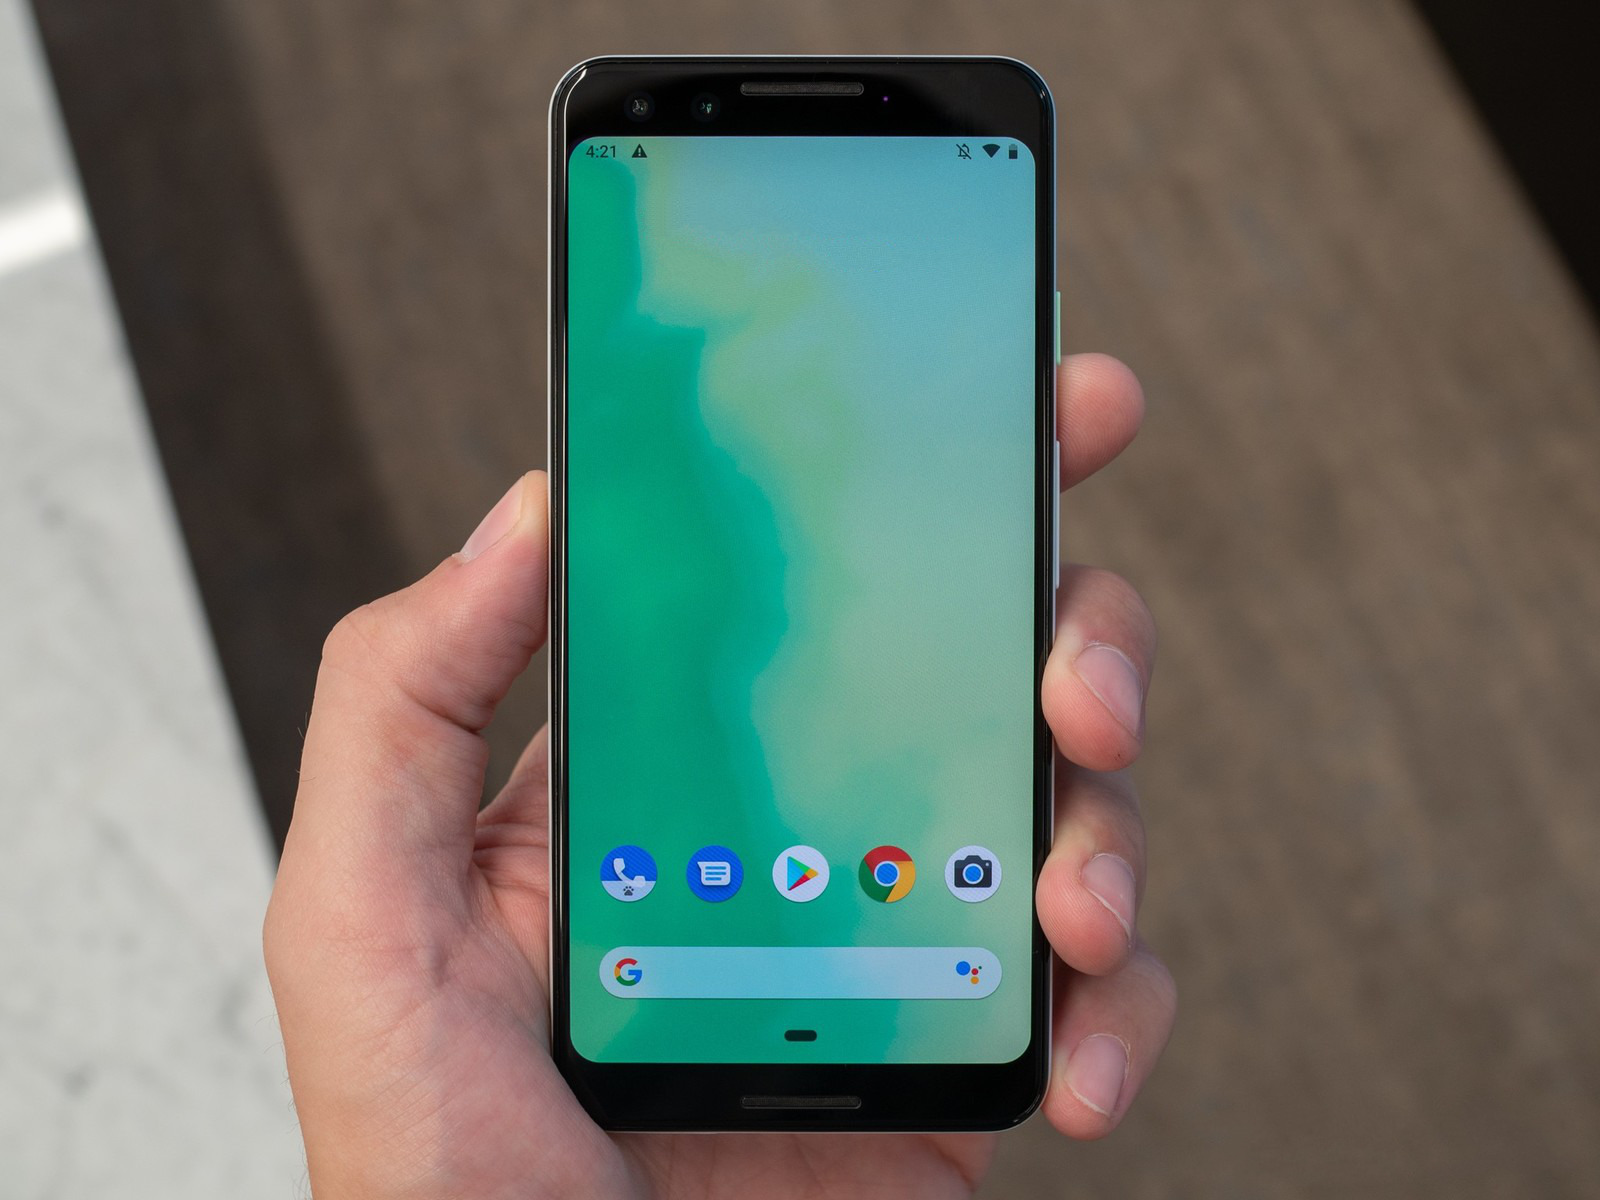 DISAPPEARING TEXT MESSAGE BUG IS BEING ADDRESSED BY GOOGLE IN GOOGLE PIXEL 3